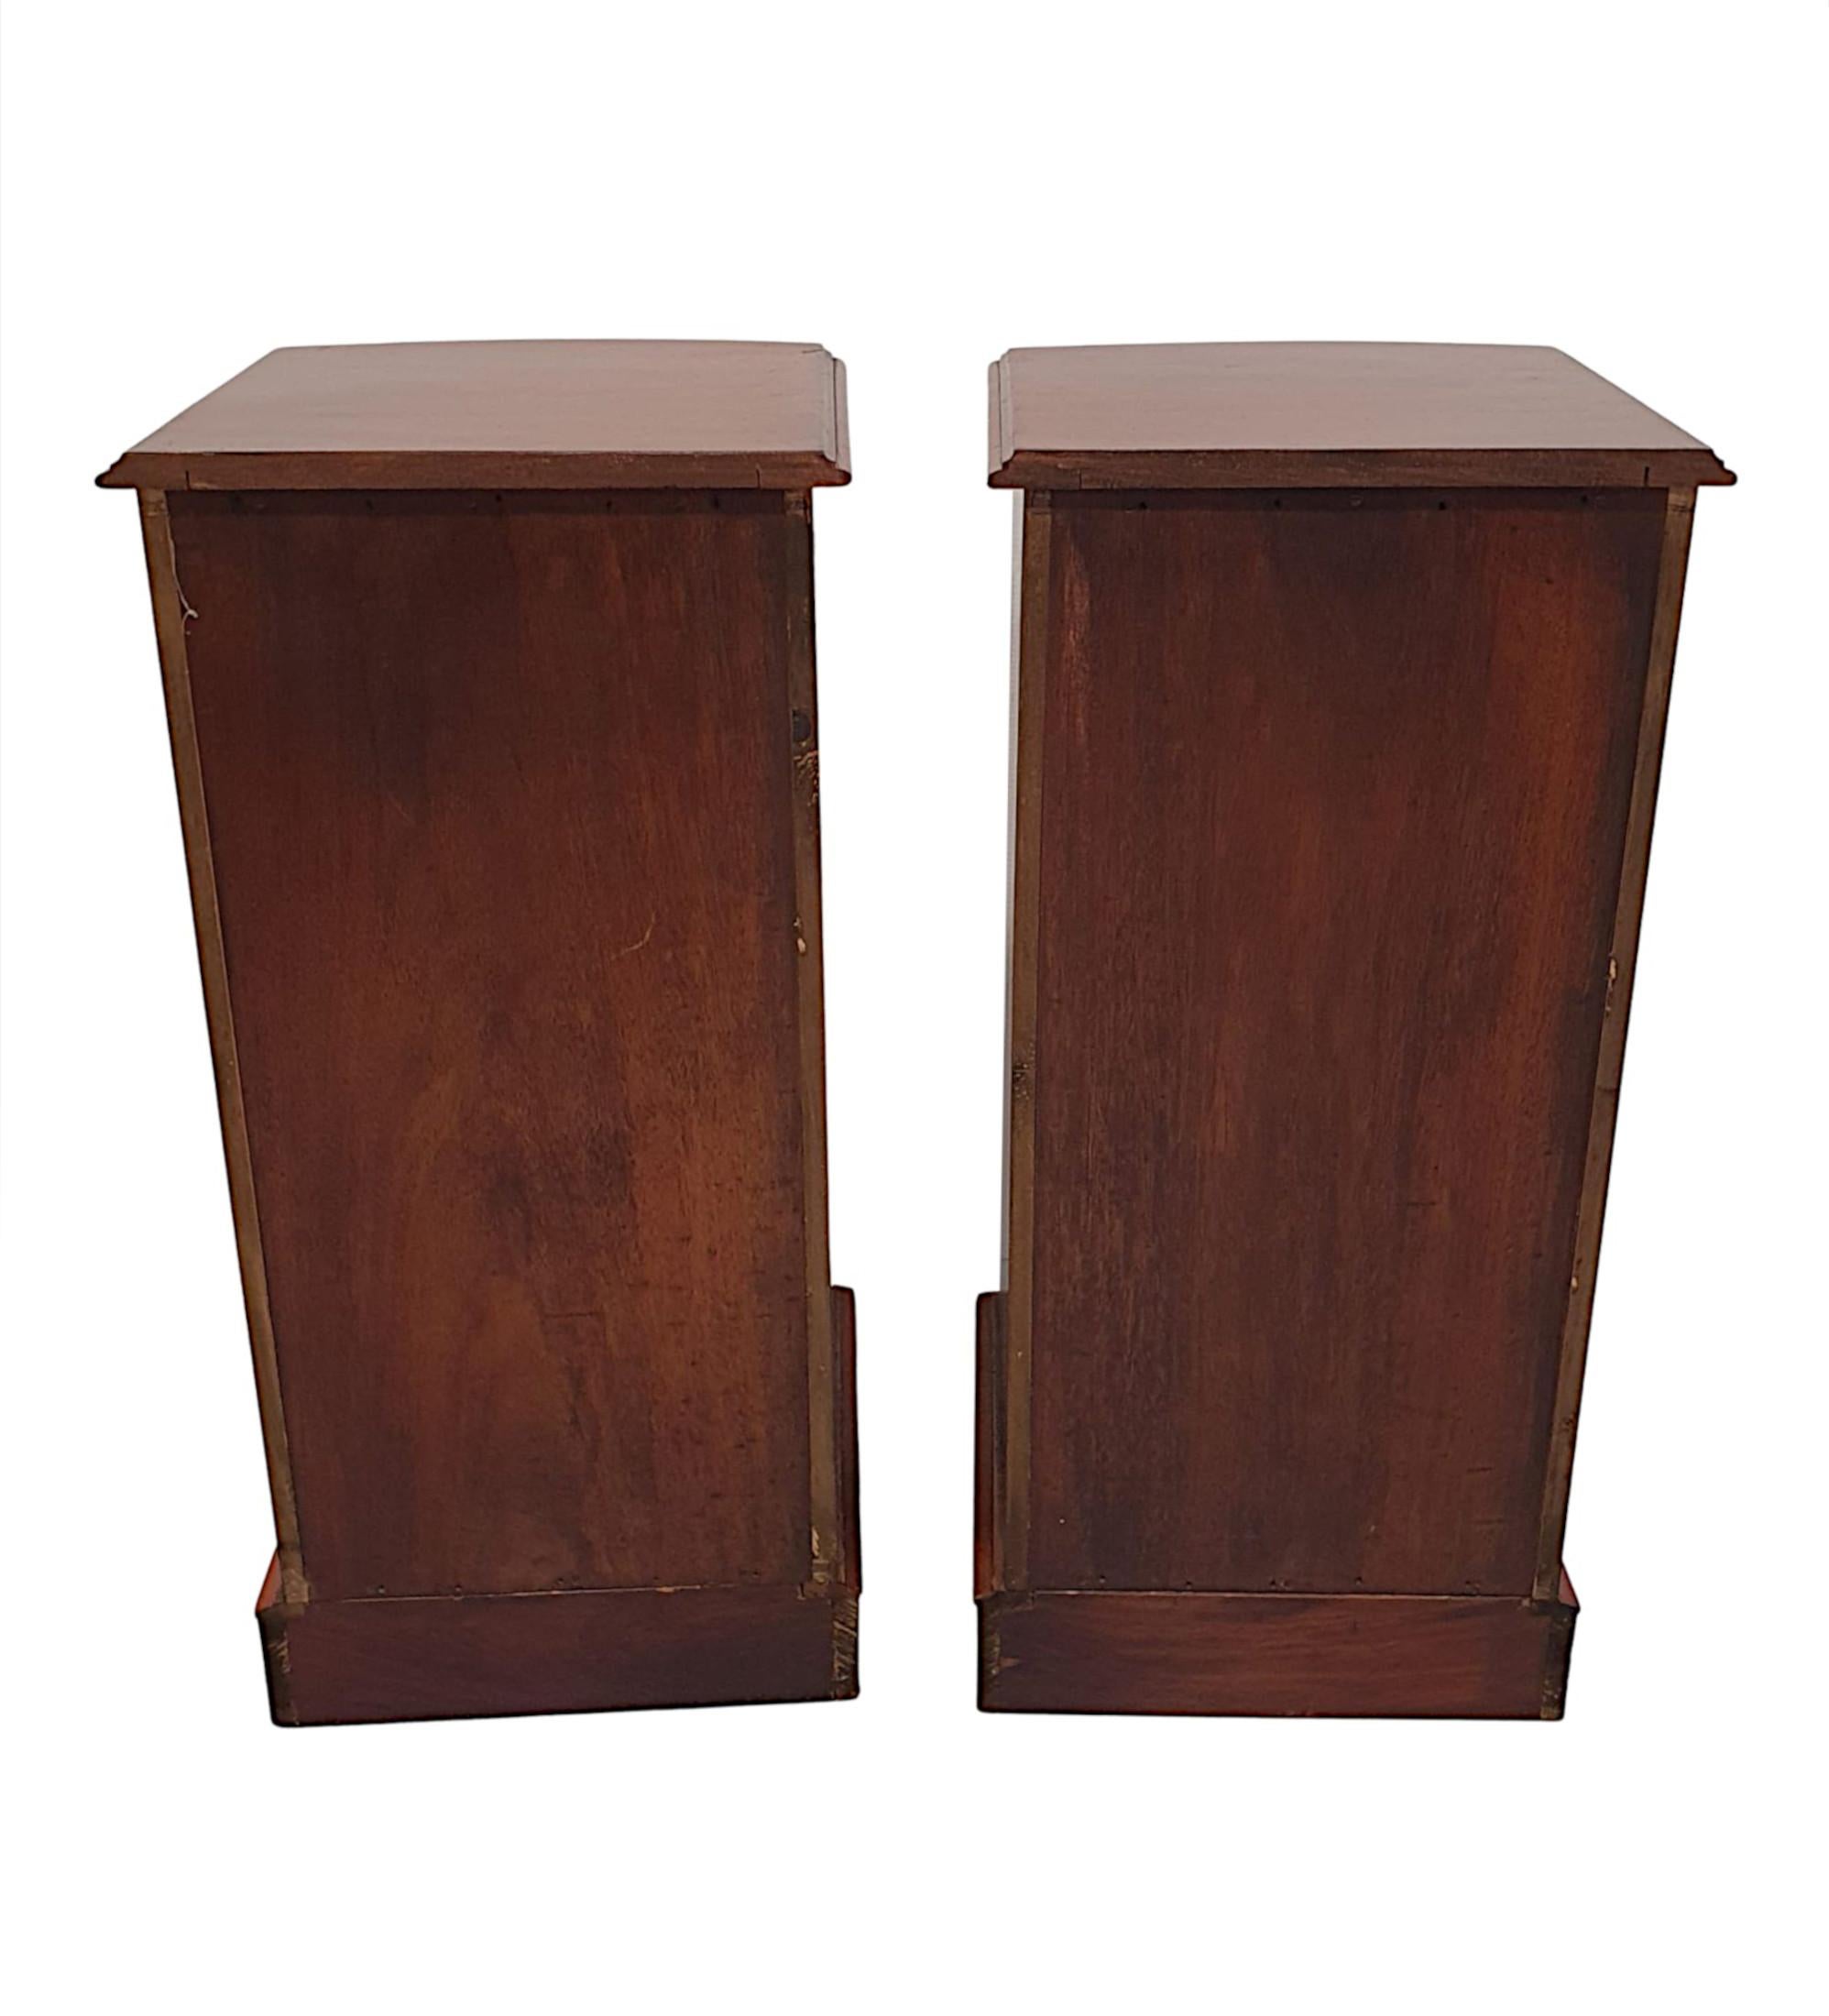 A Very Fine Pair of Large 19th Century Bow Fronted Bedside Chests For Sale 2